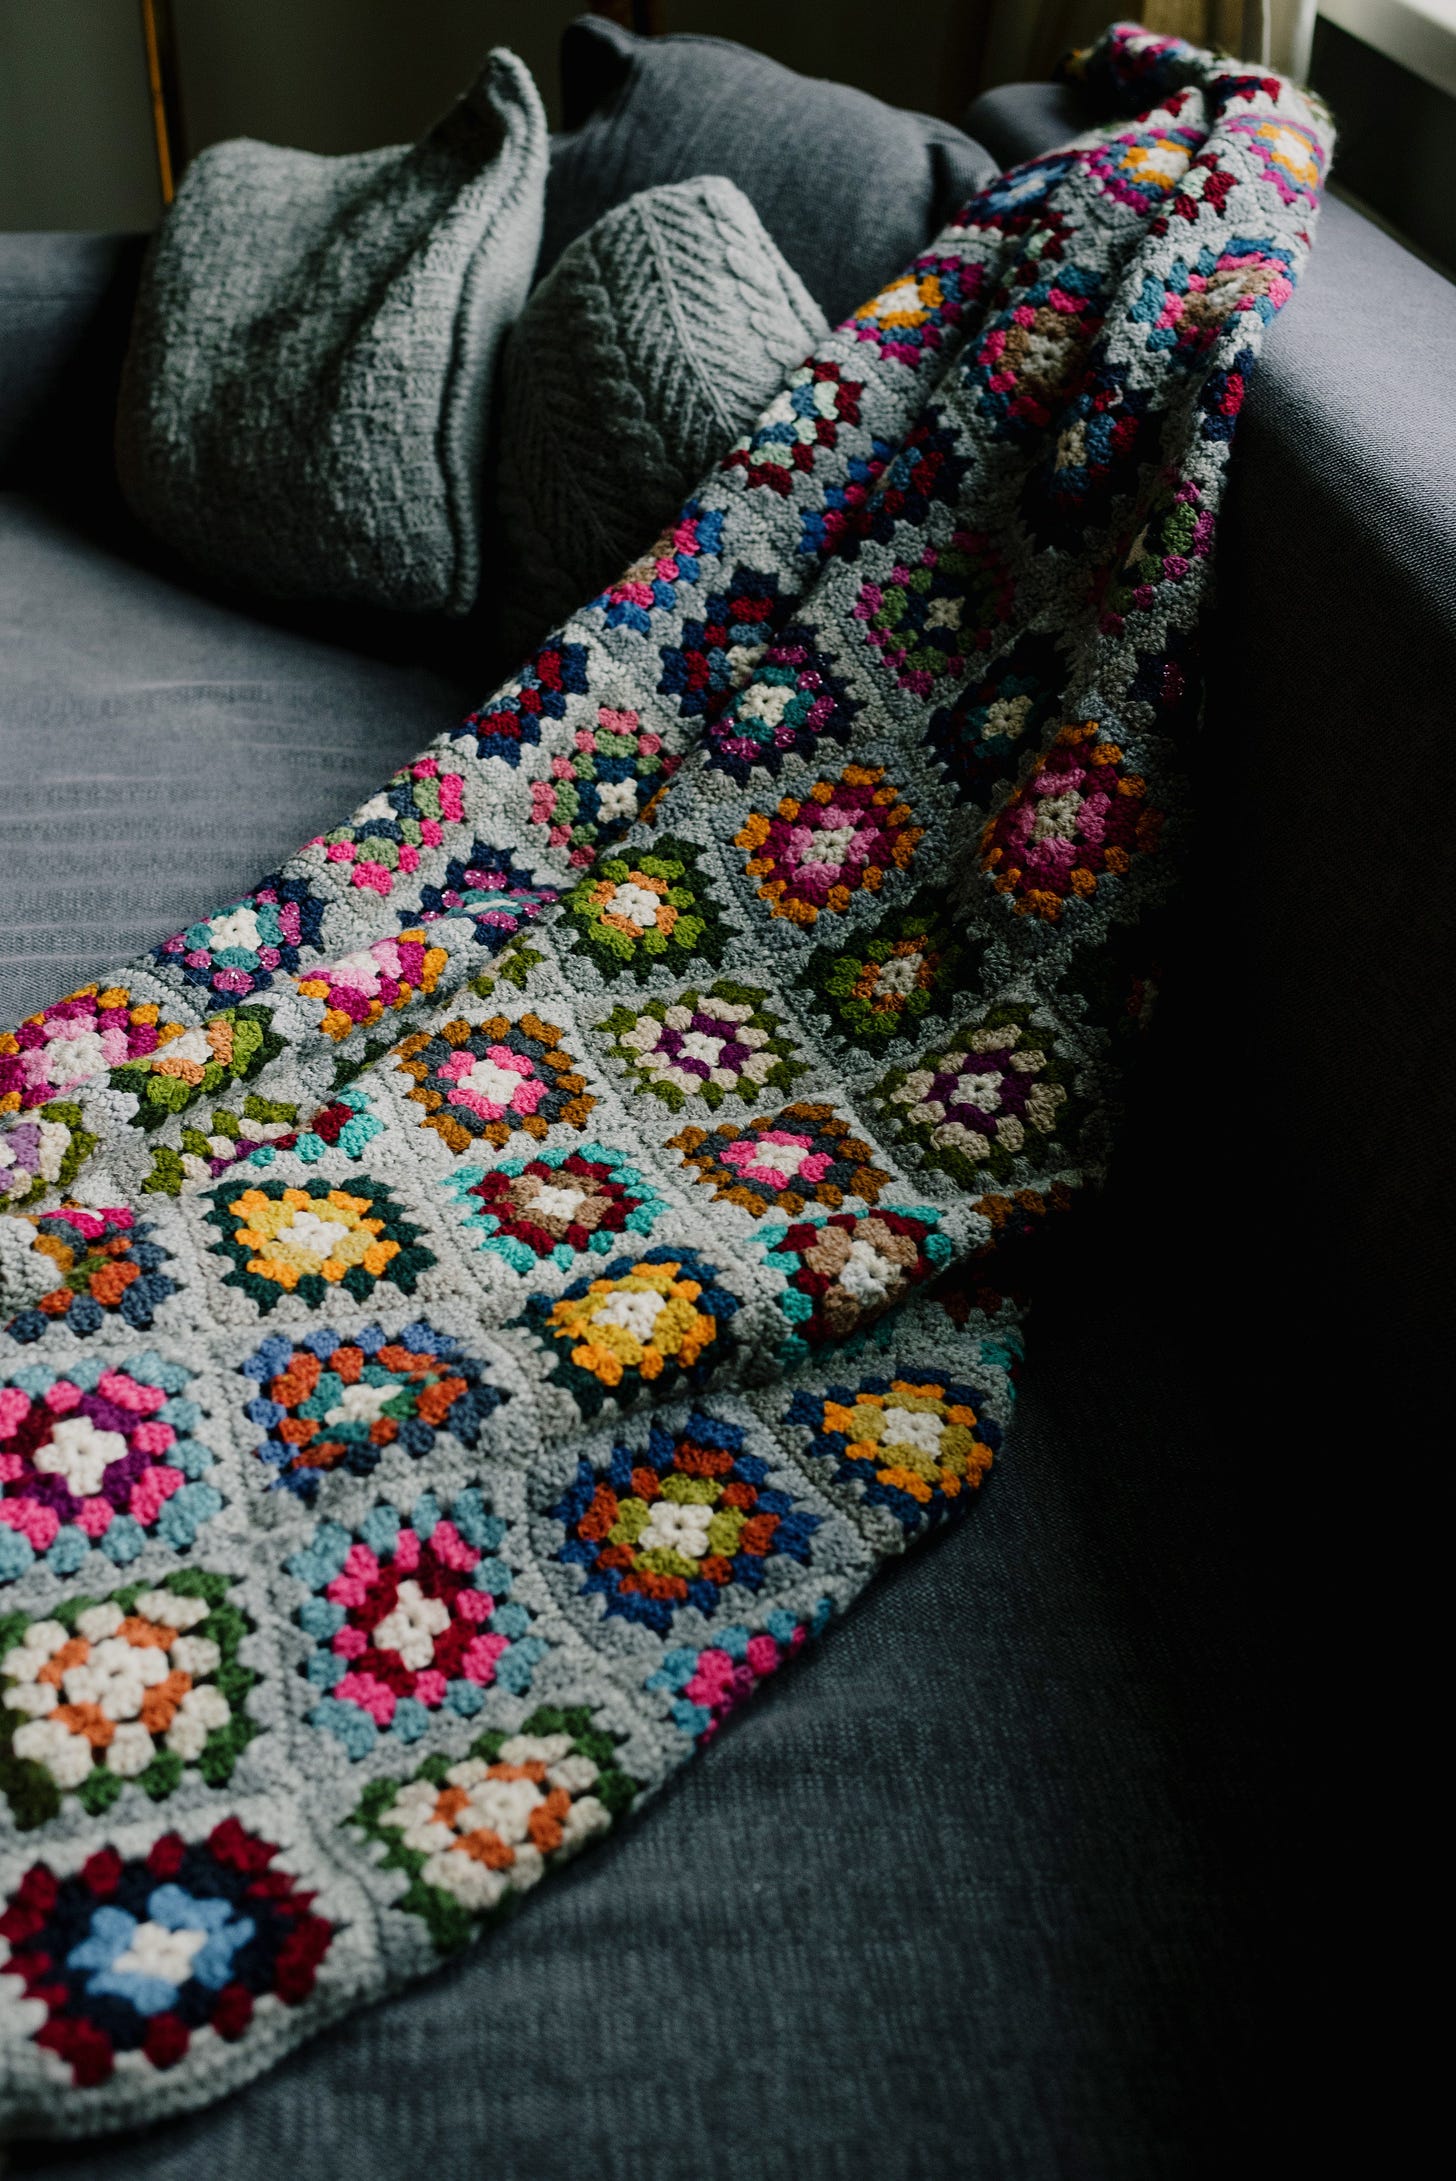 A colourful crocheted blanket lies across the cushion and over the back of a grey sofa.